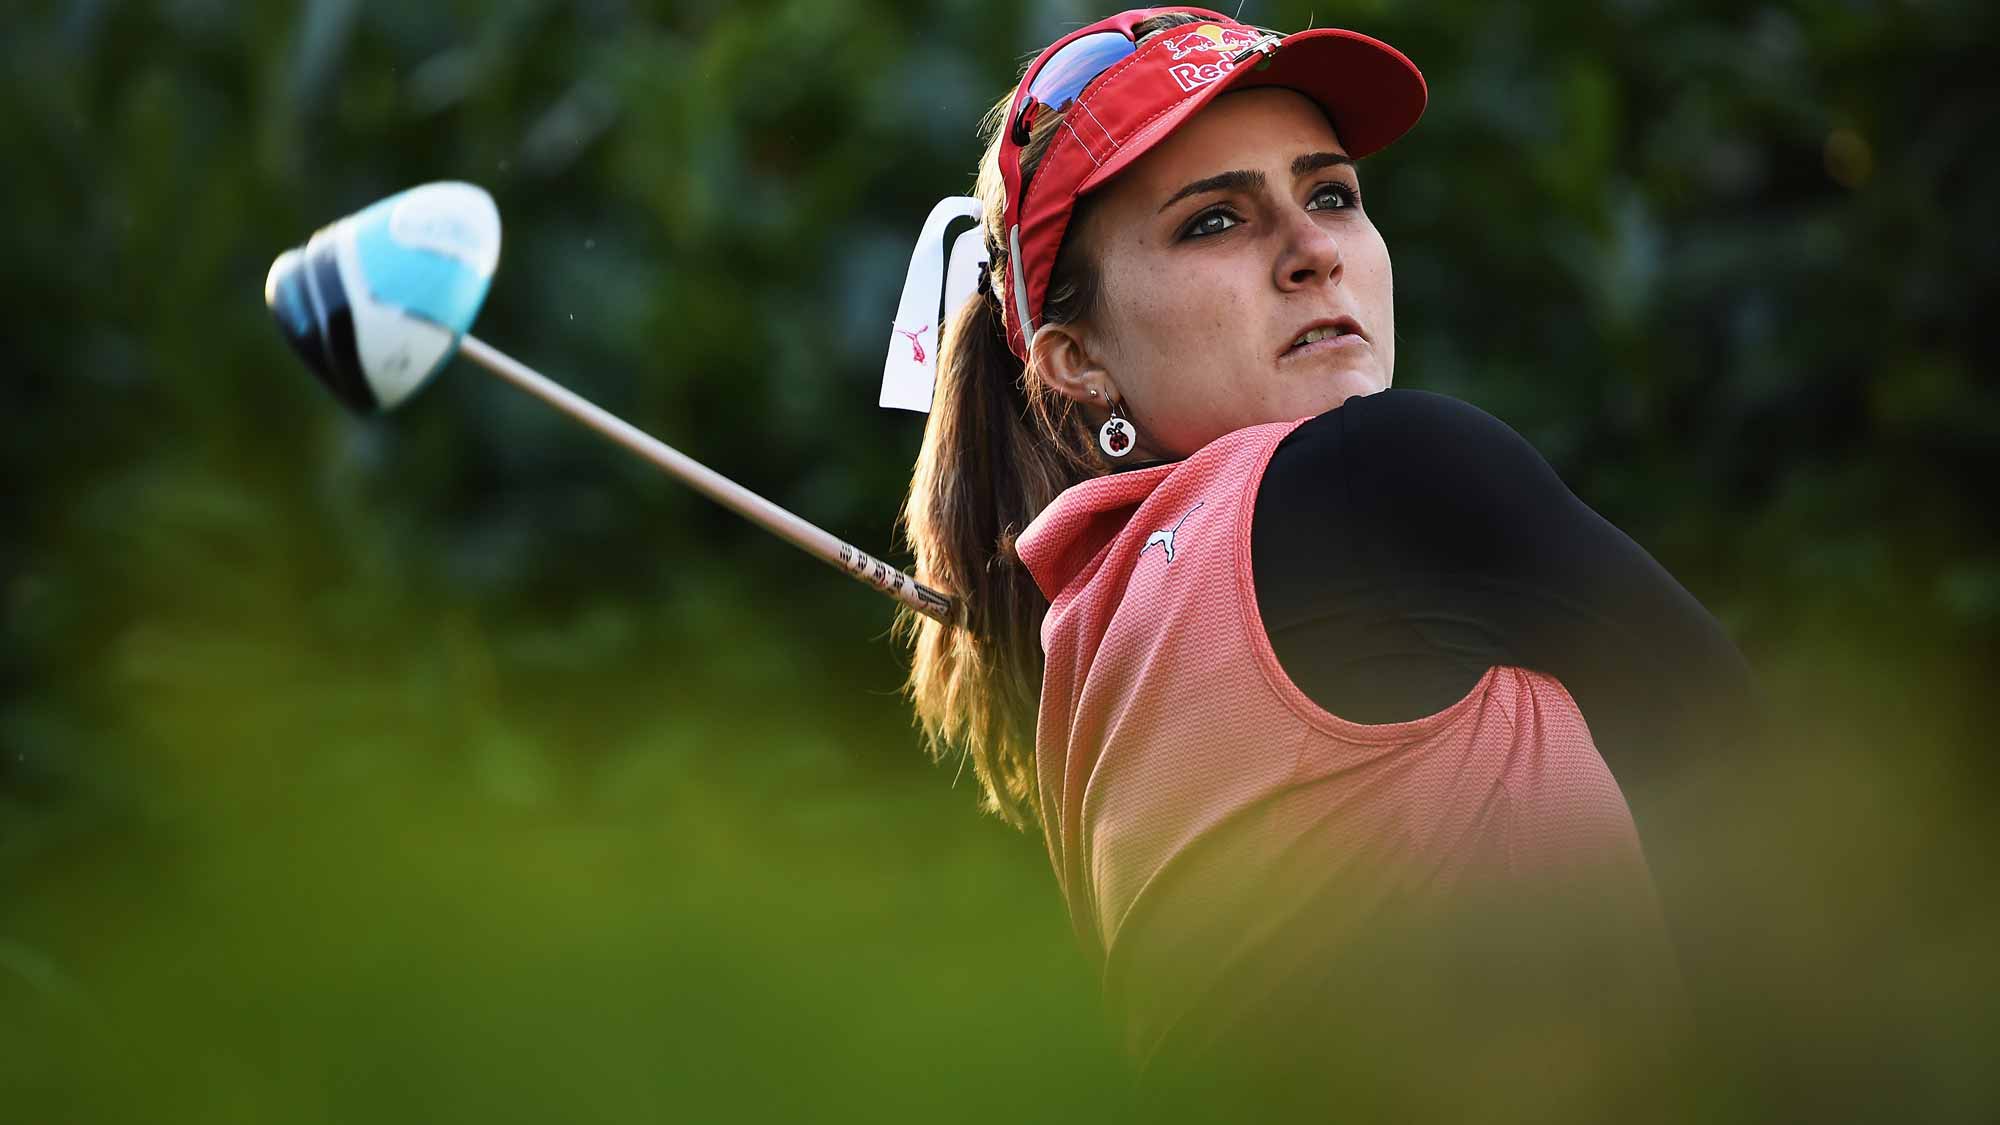 Lexi Thompson during the first round of the Evian Championship Golf